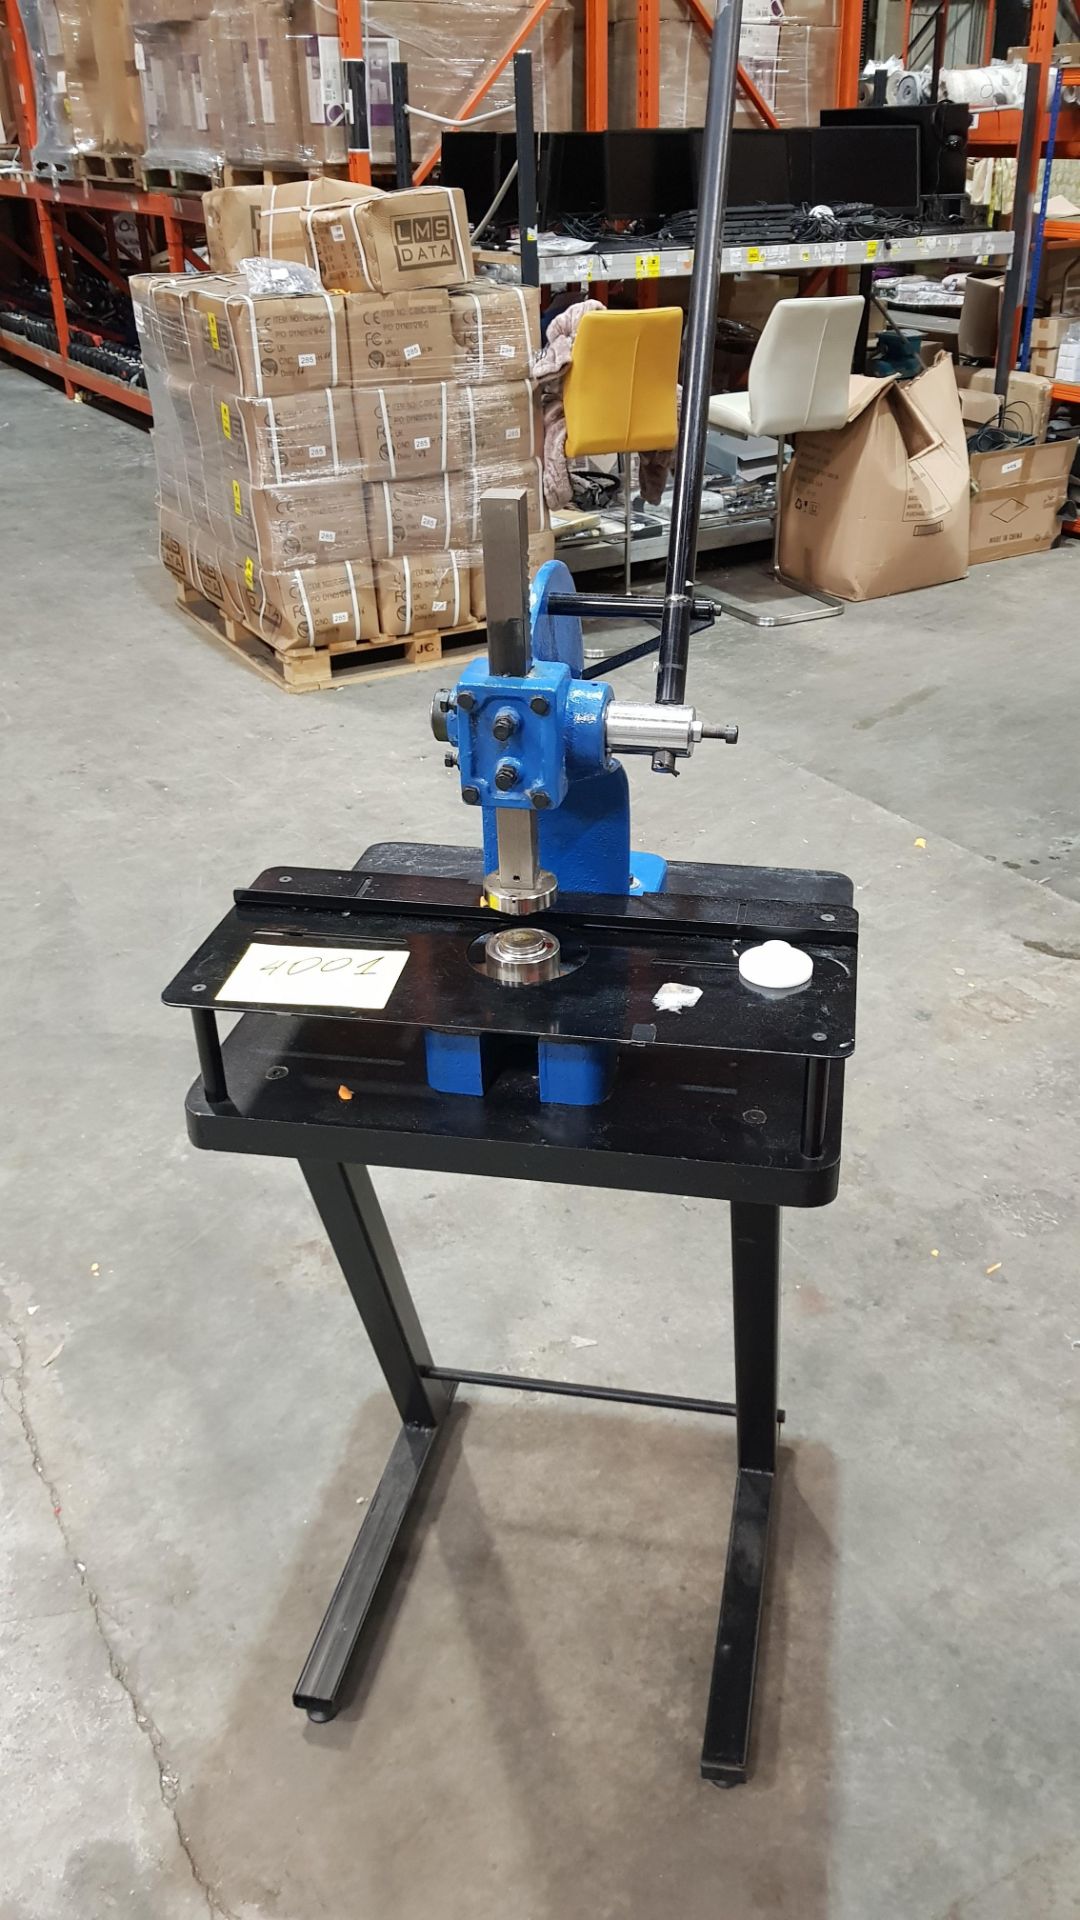 1 X MANUAL INDUSTRIAL EYELET MACHINE - WITH STAND AND ATTACHMENTS